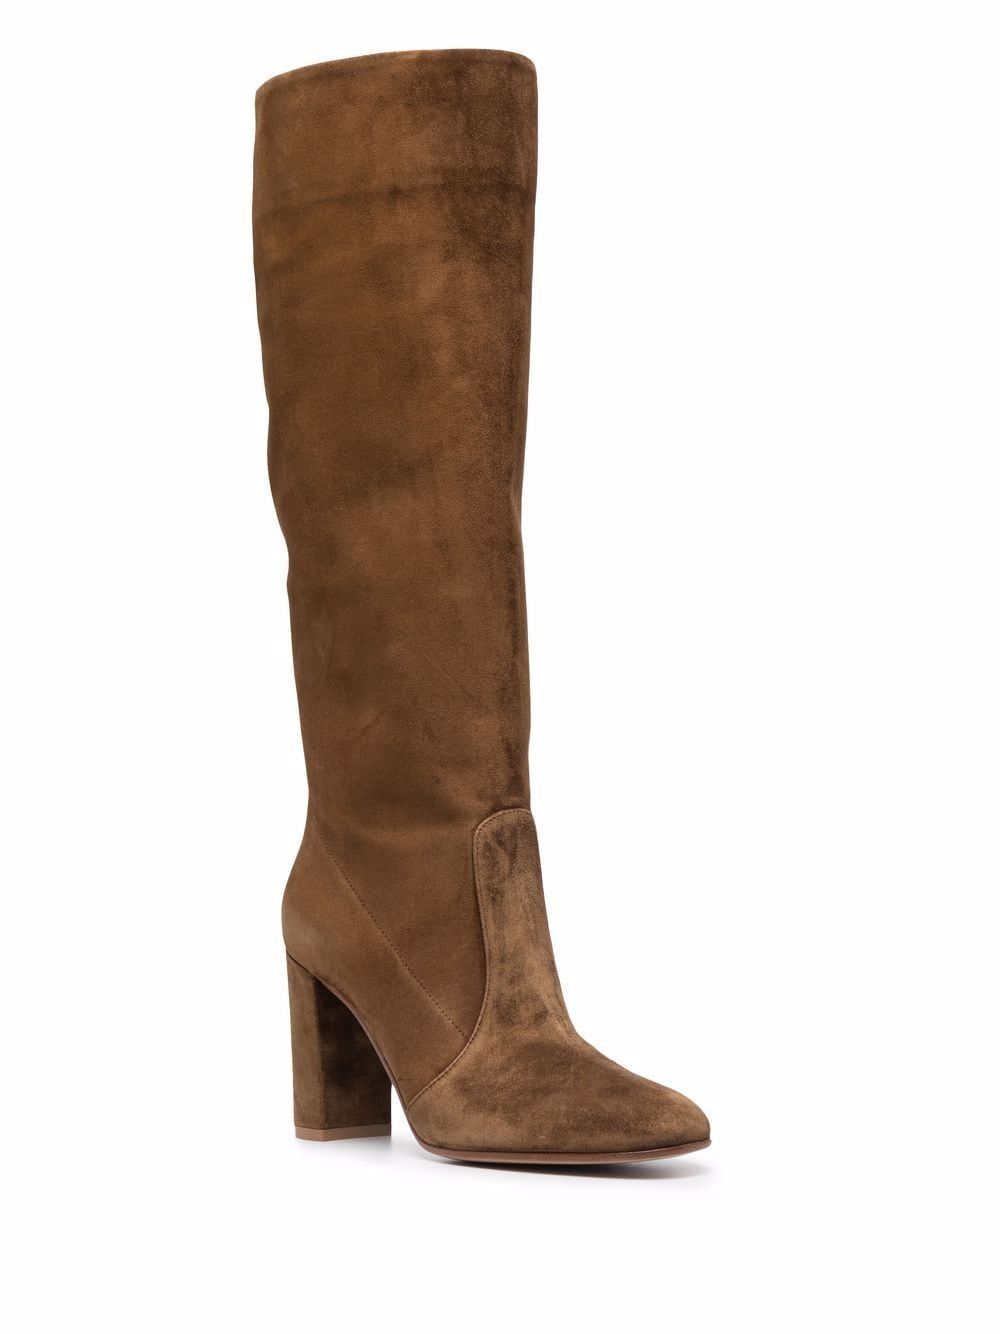 heeled suede boots | Farfetch Global